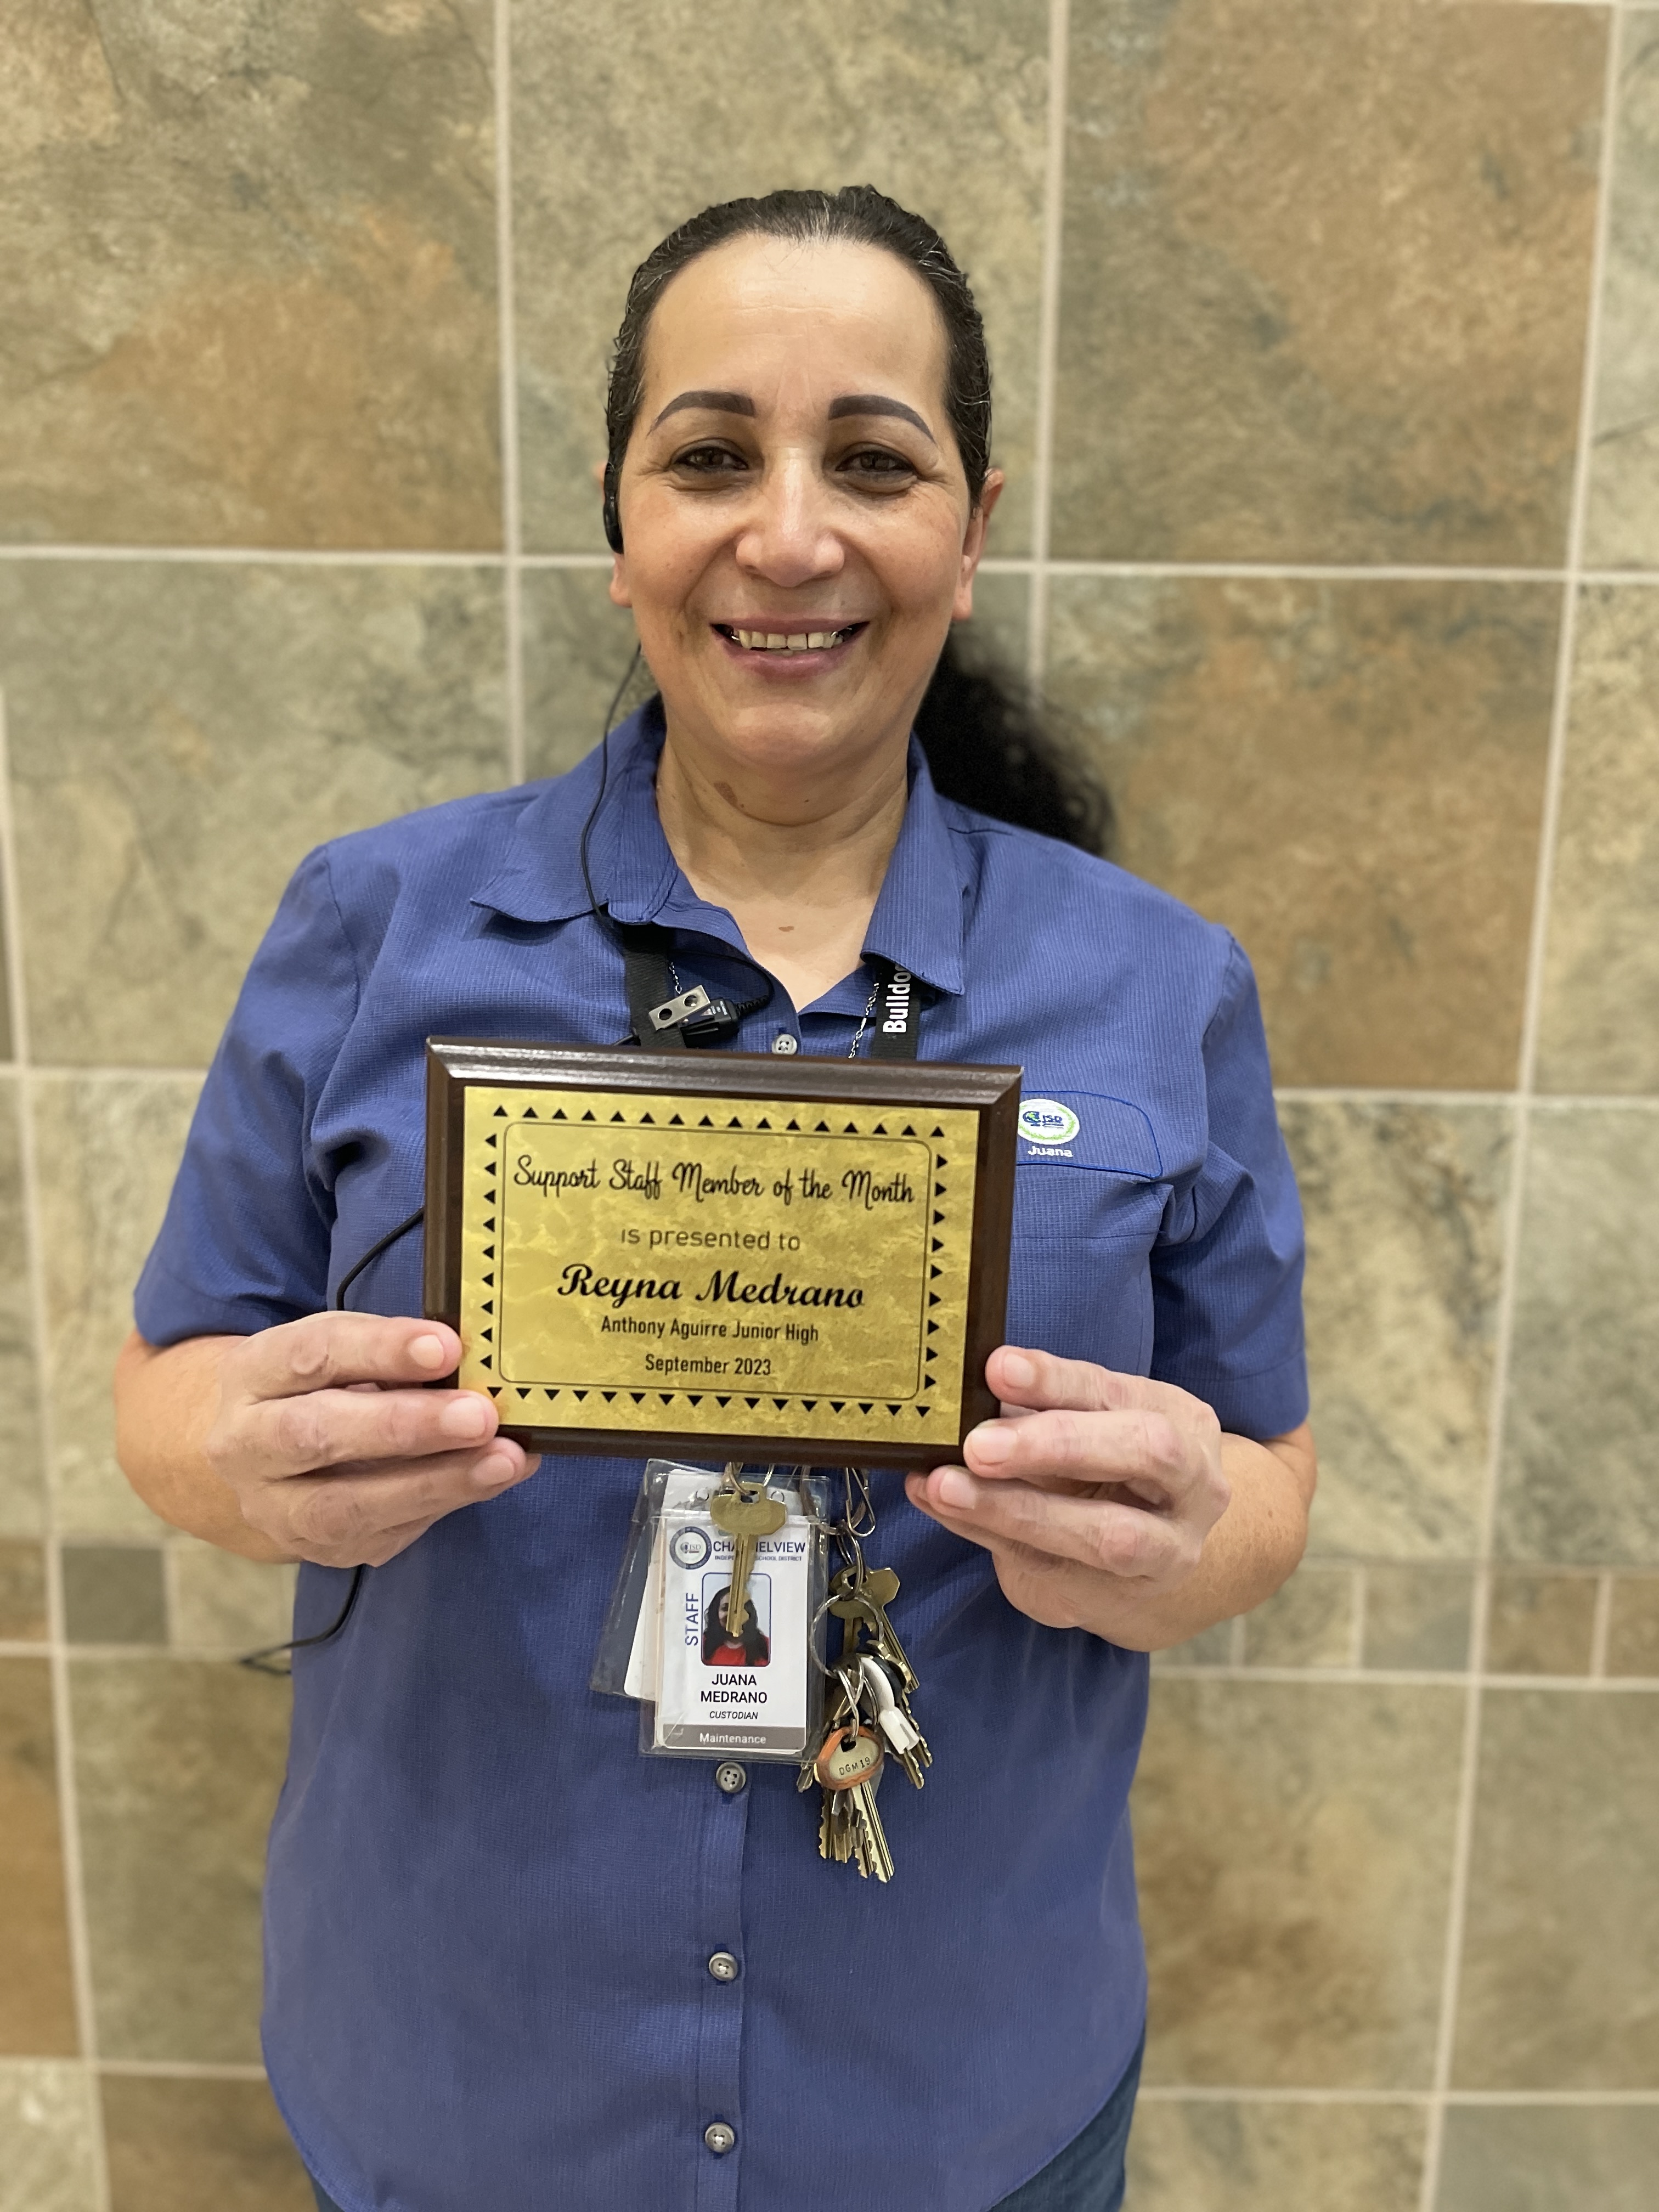 Ms. Medrano - September Staff Member of the Month